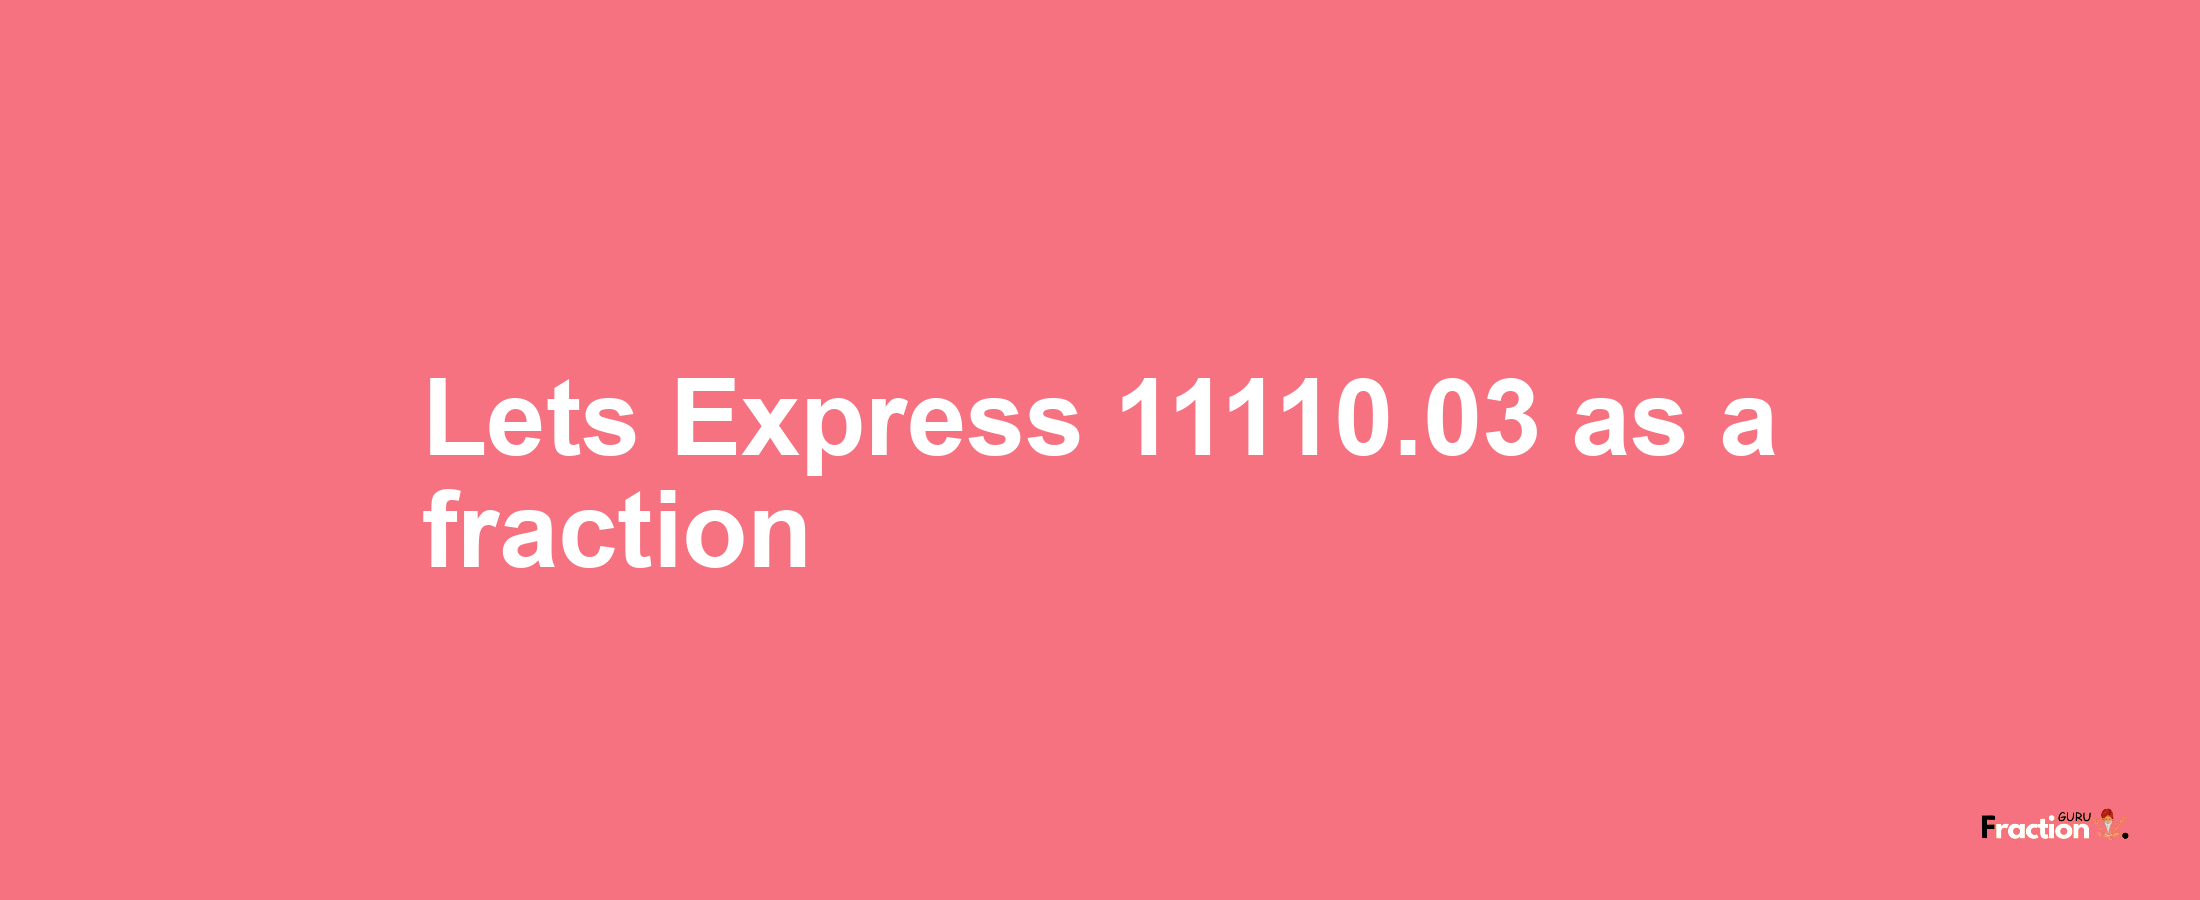 Lets Express 11110.03 as afraction